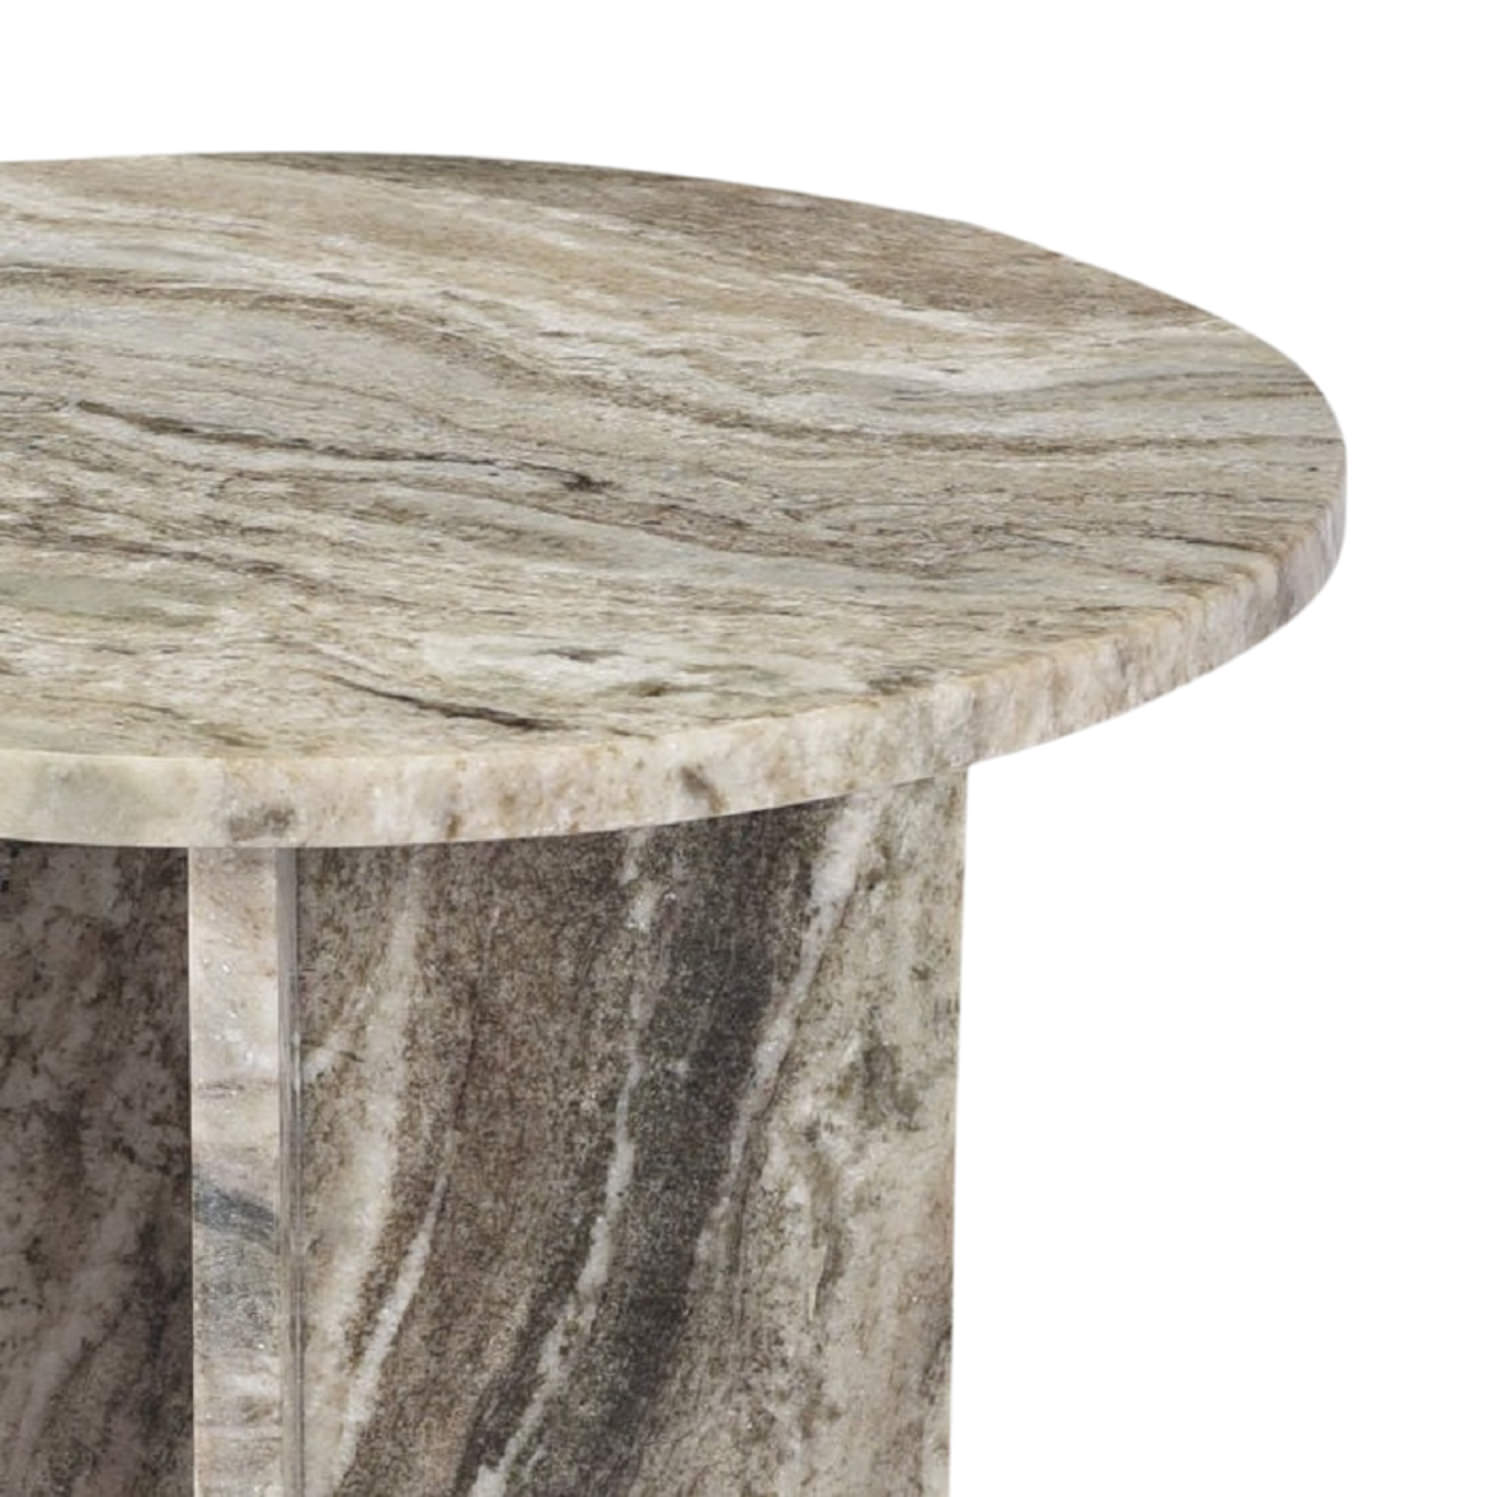 Peter Accent Table